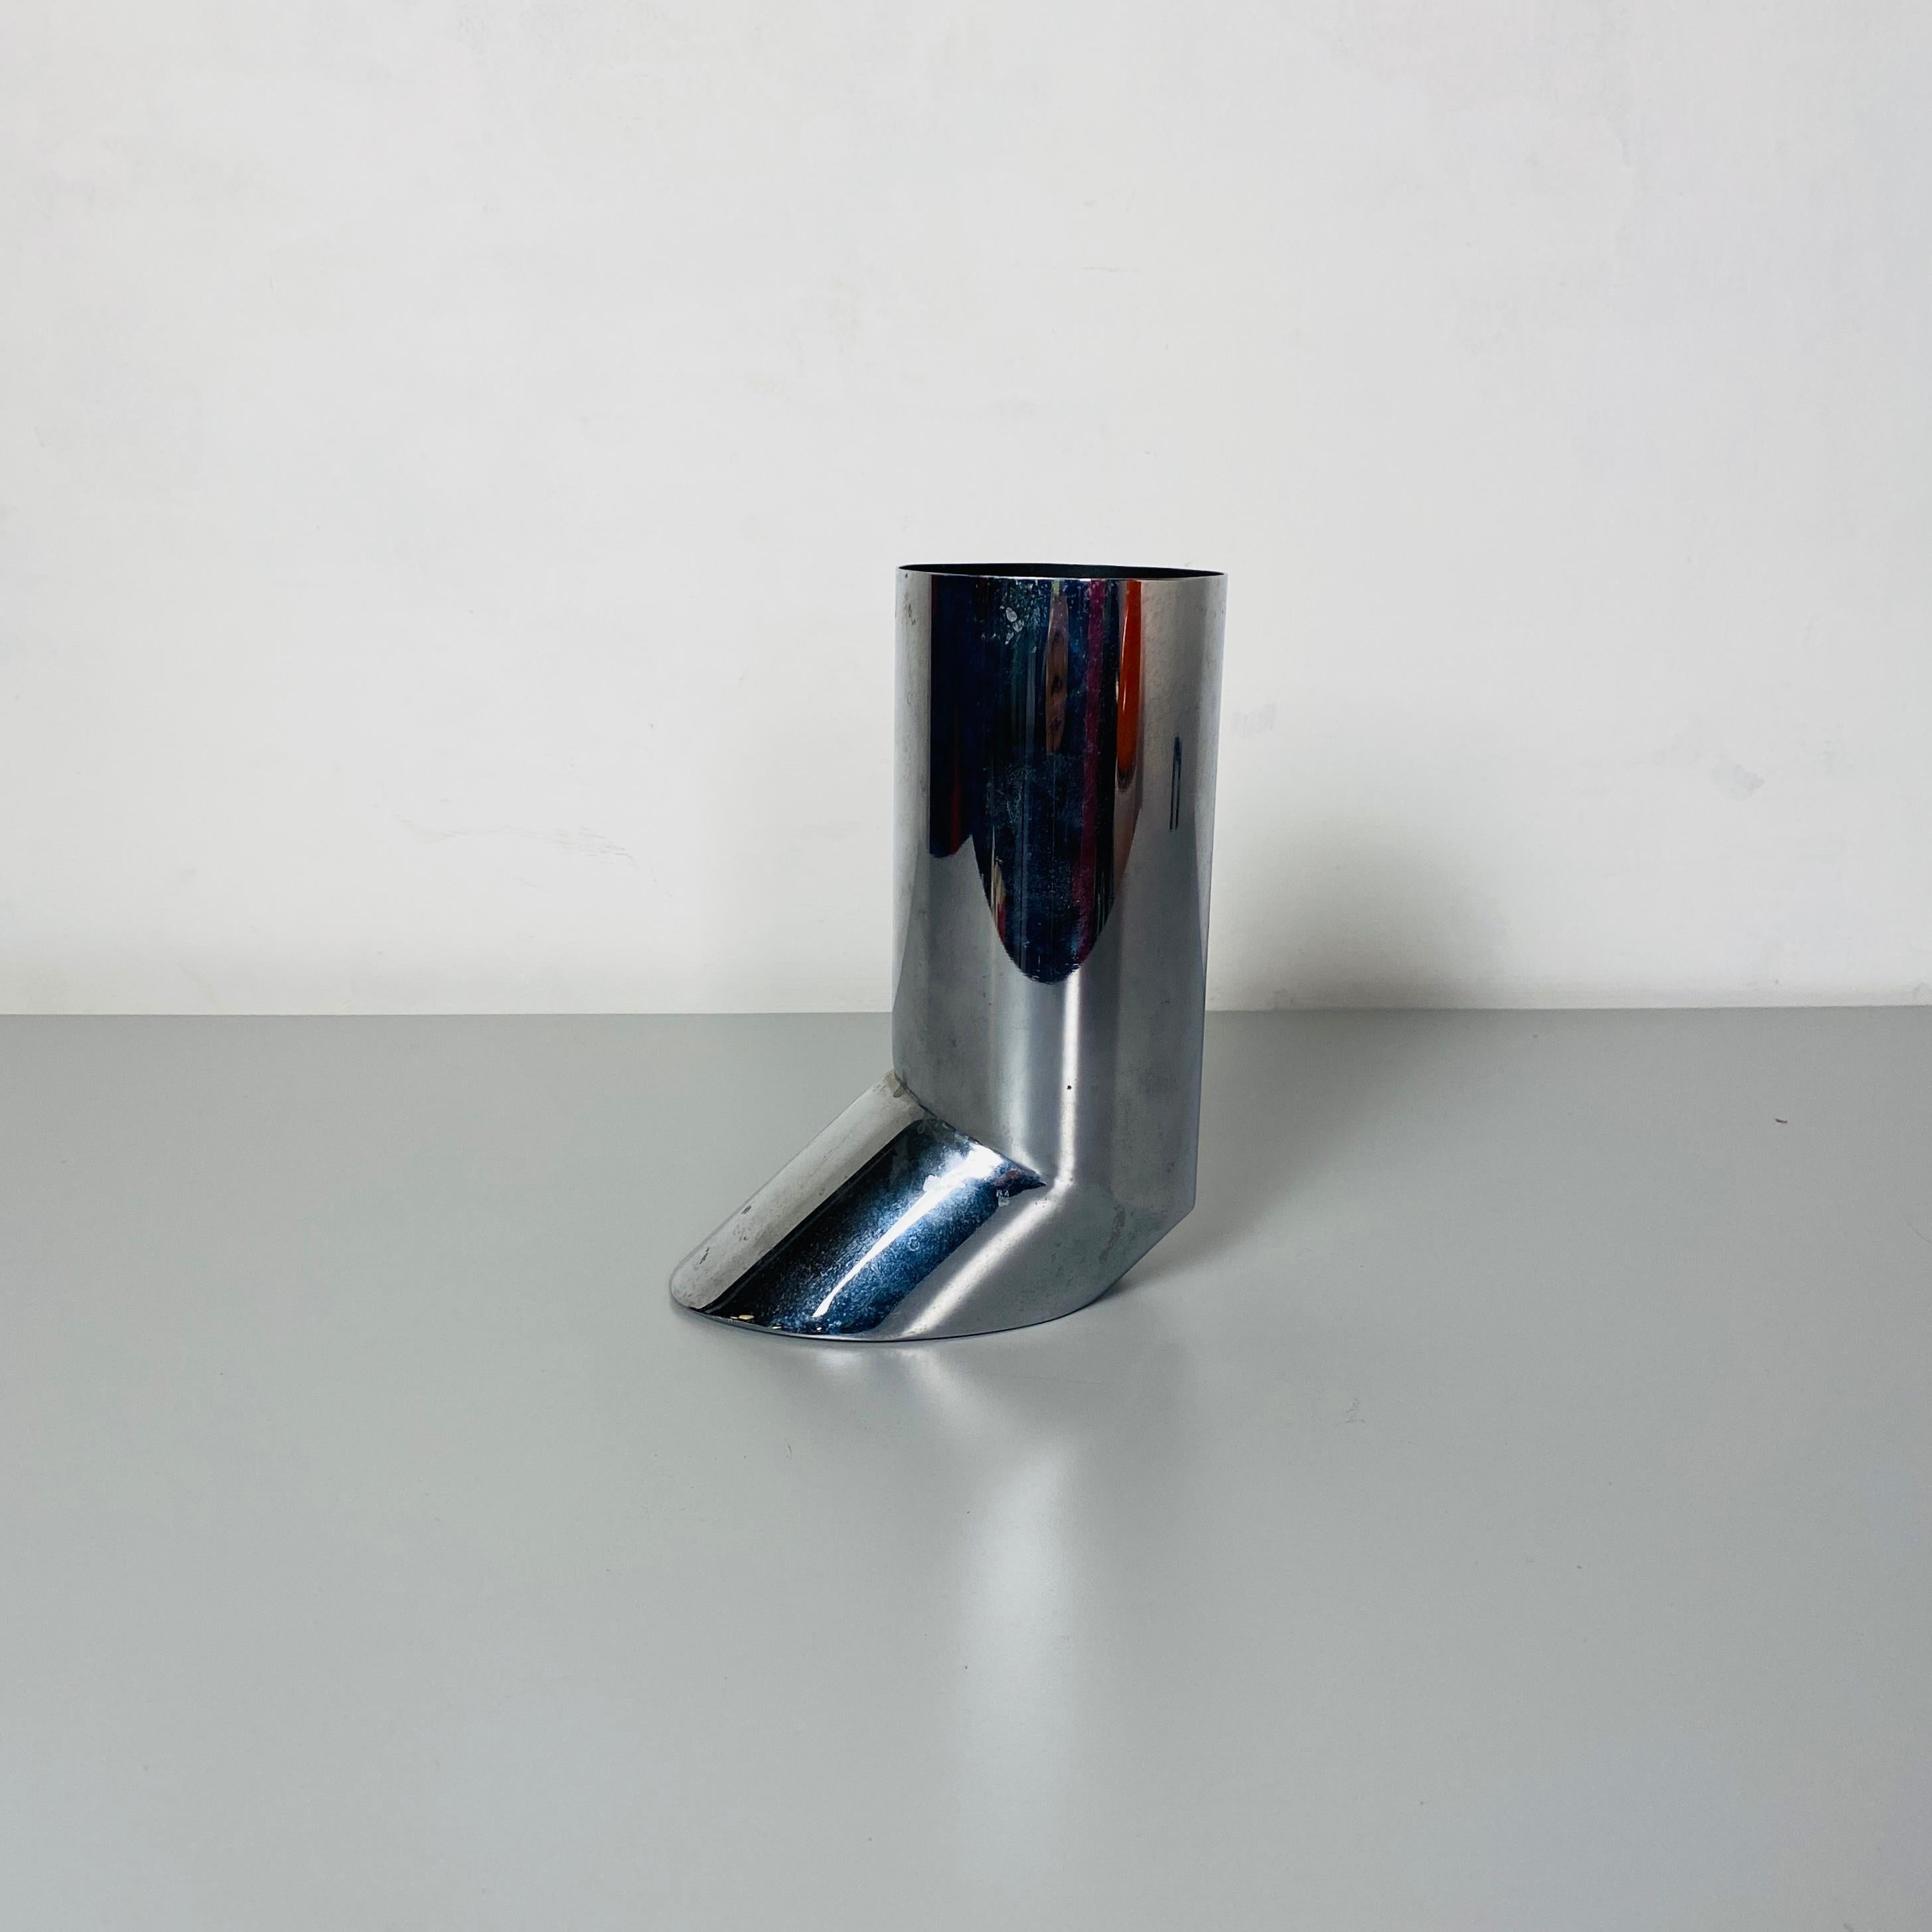 Italian Mid-Century Modern irregular shaped steel vase, 1970s
Irregular shaped steel vase.
Fantastic space age style adapt for decorations or for contain flower 

excellent general conditions

The Measures are in cm 20 x 10 x 22,5 H cm.

If you are